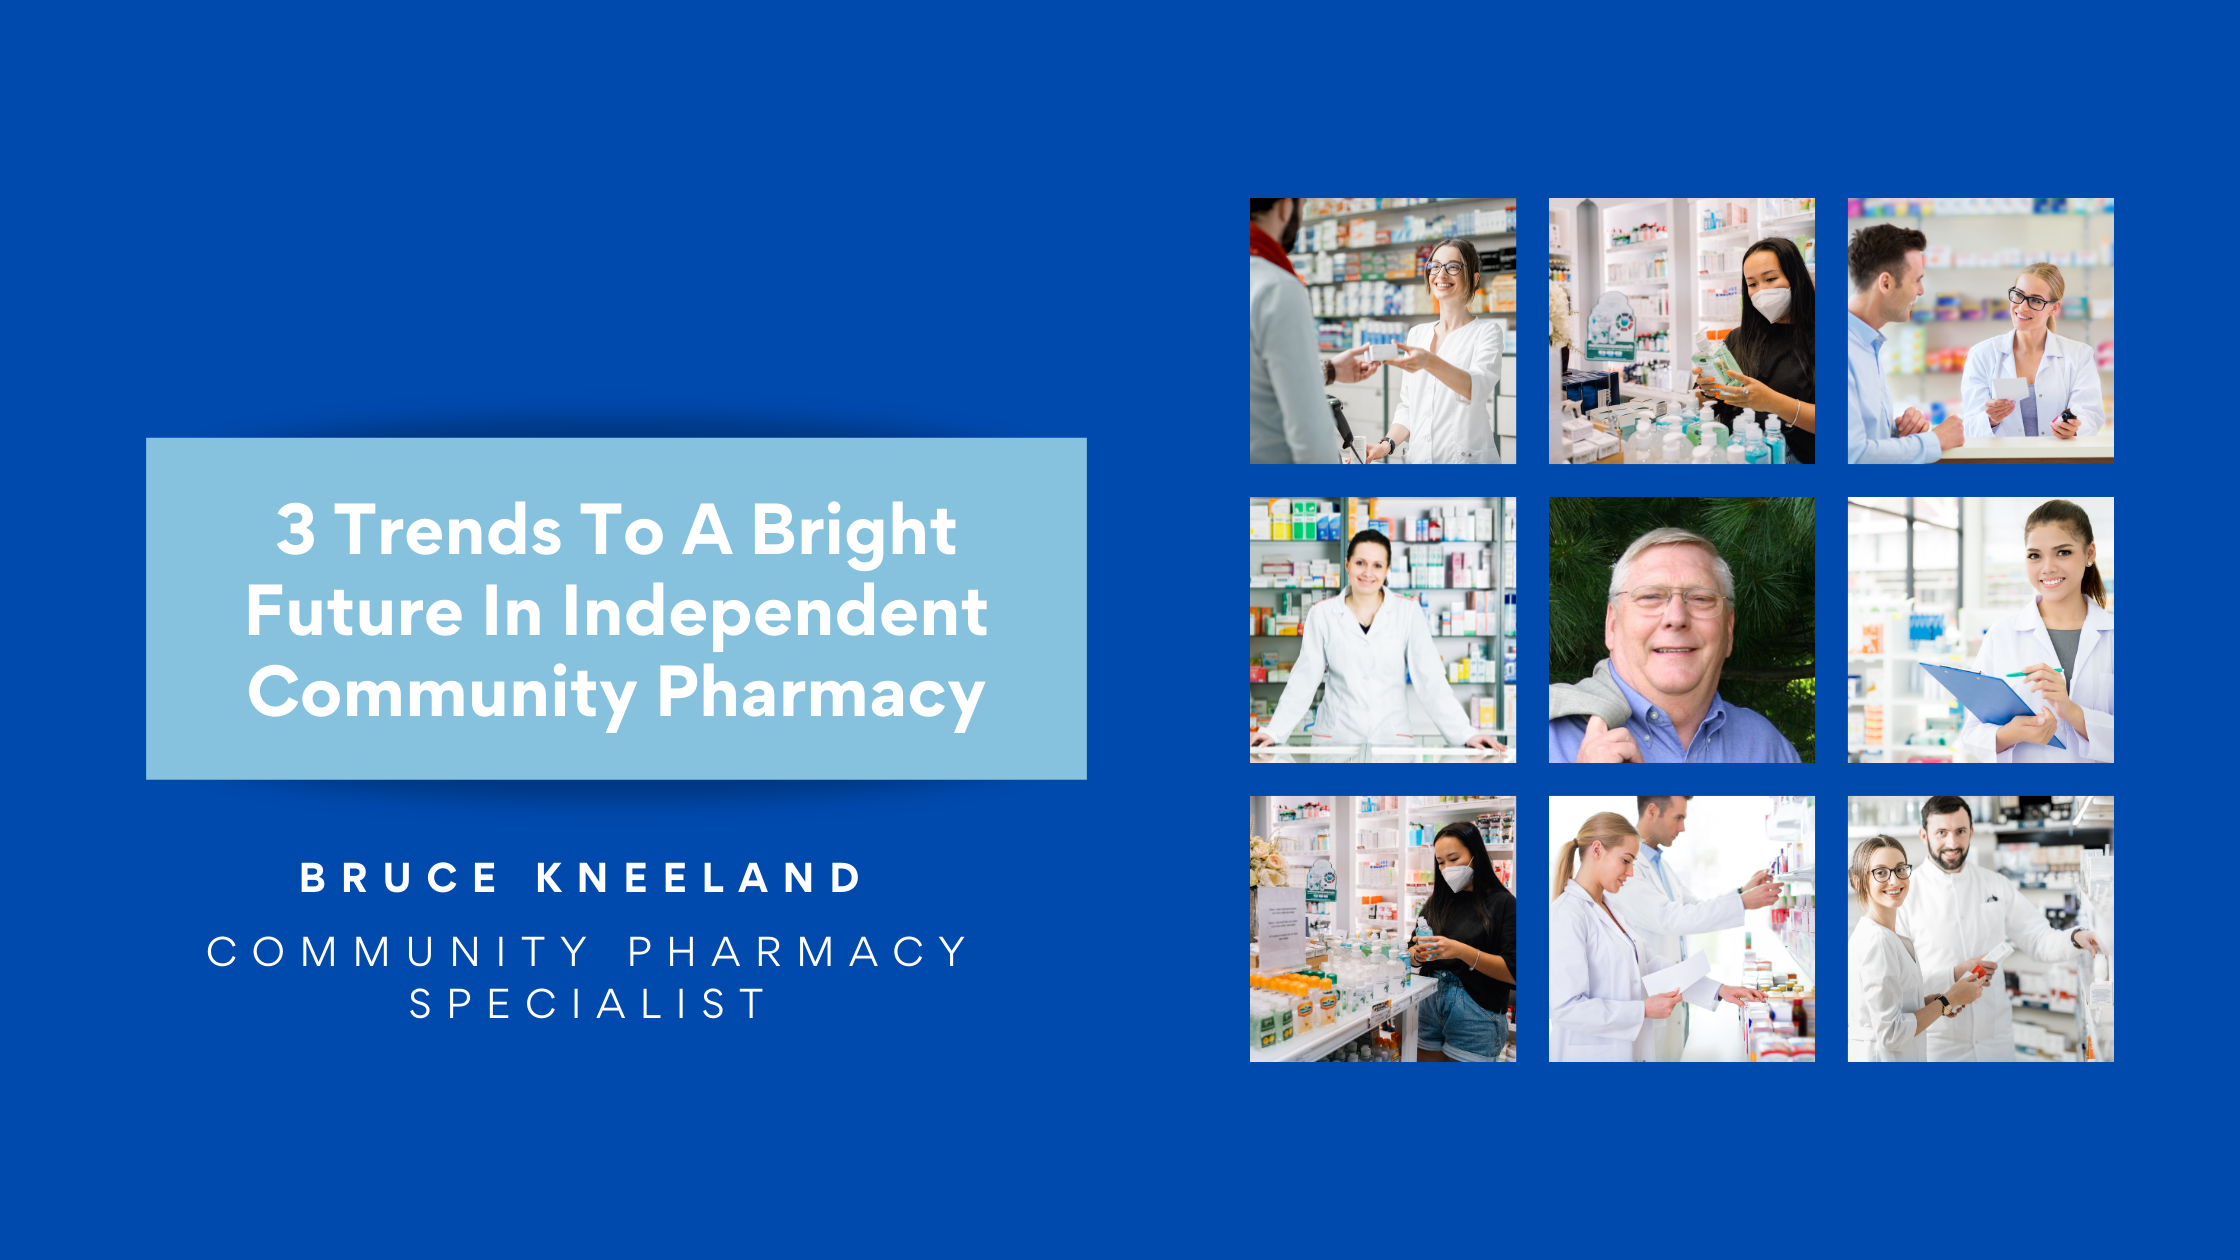 3 Trends To A Bright Future In Independent Community Pharmacy